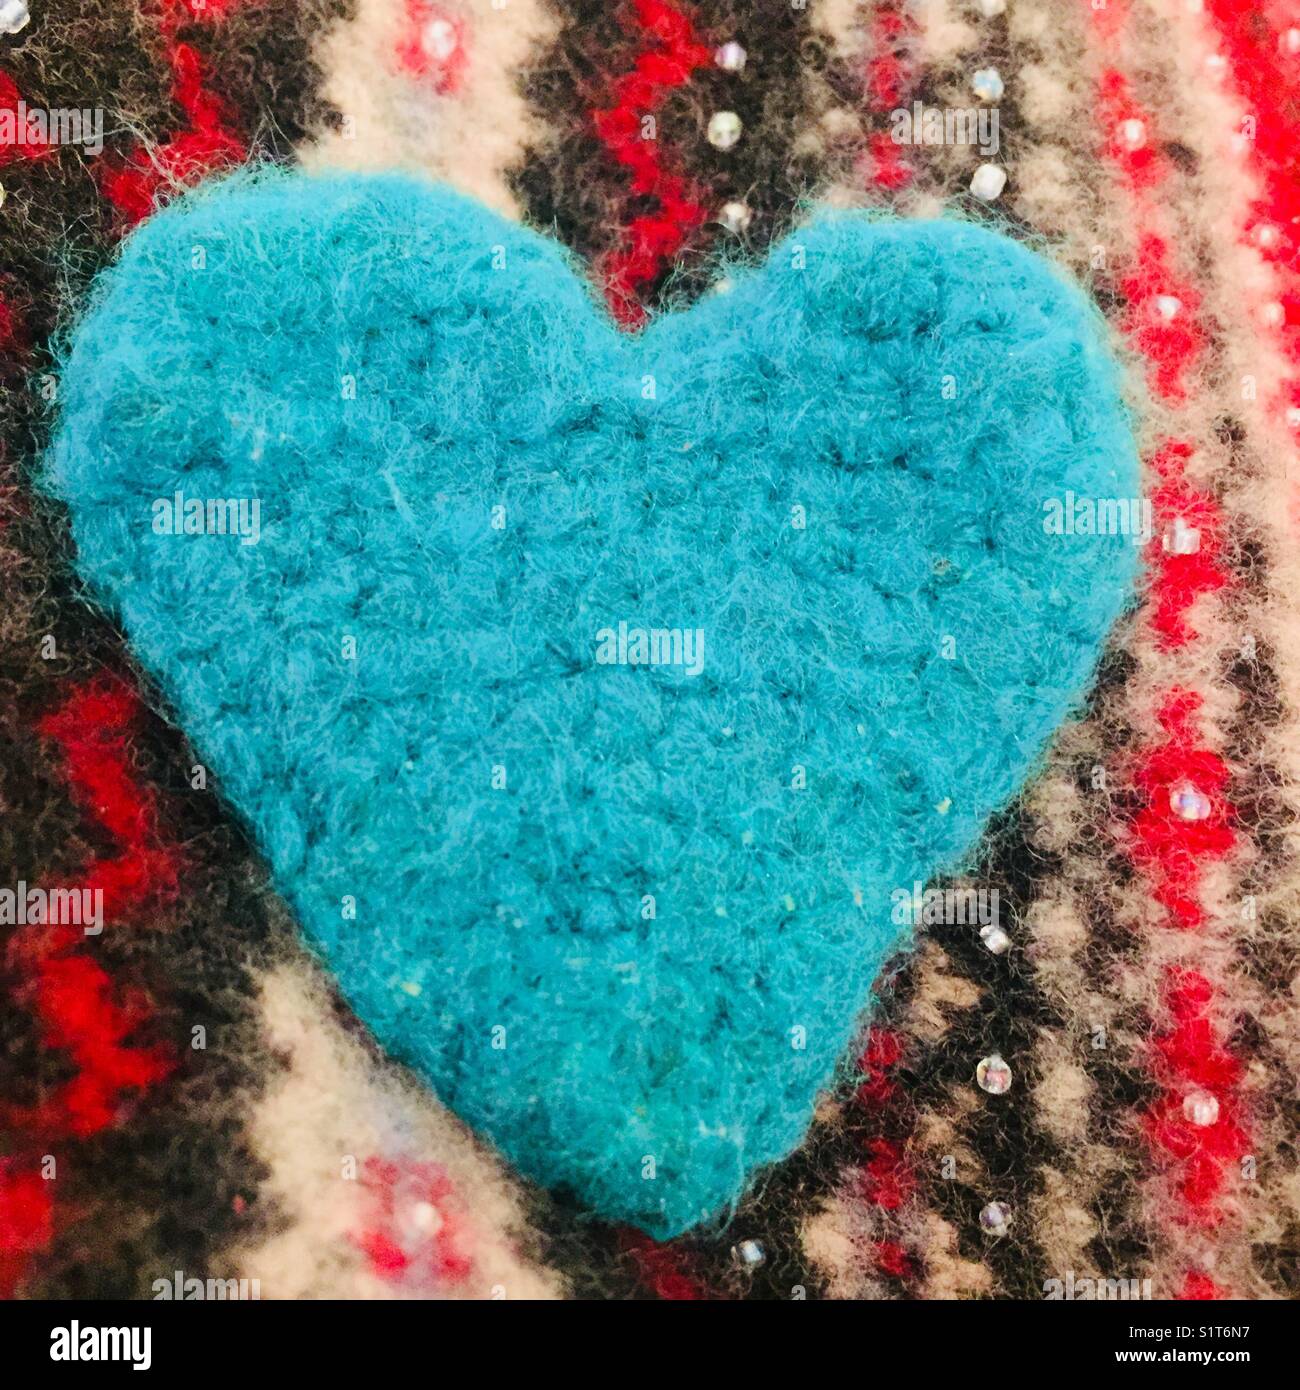 Vibrant teal blue crocheted heart on knitted background Stock Photo